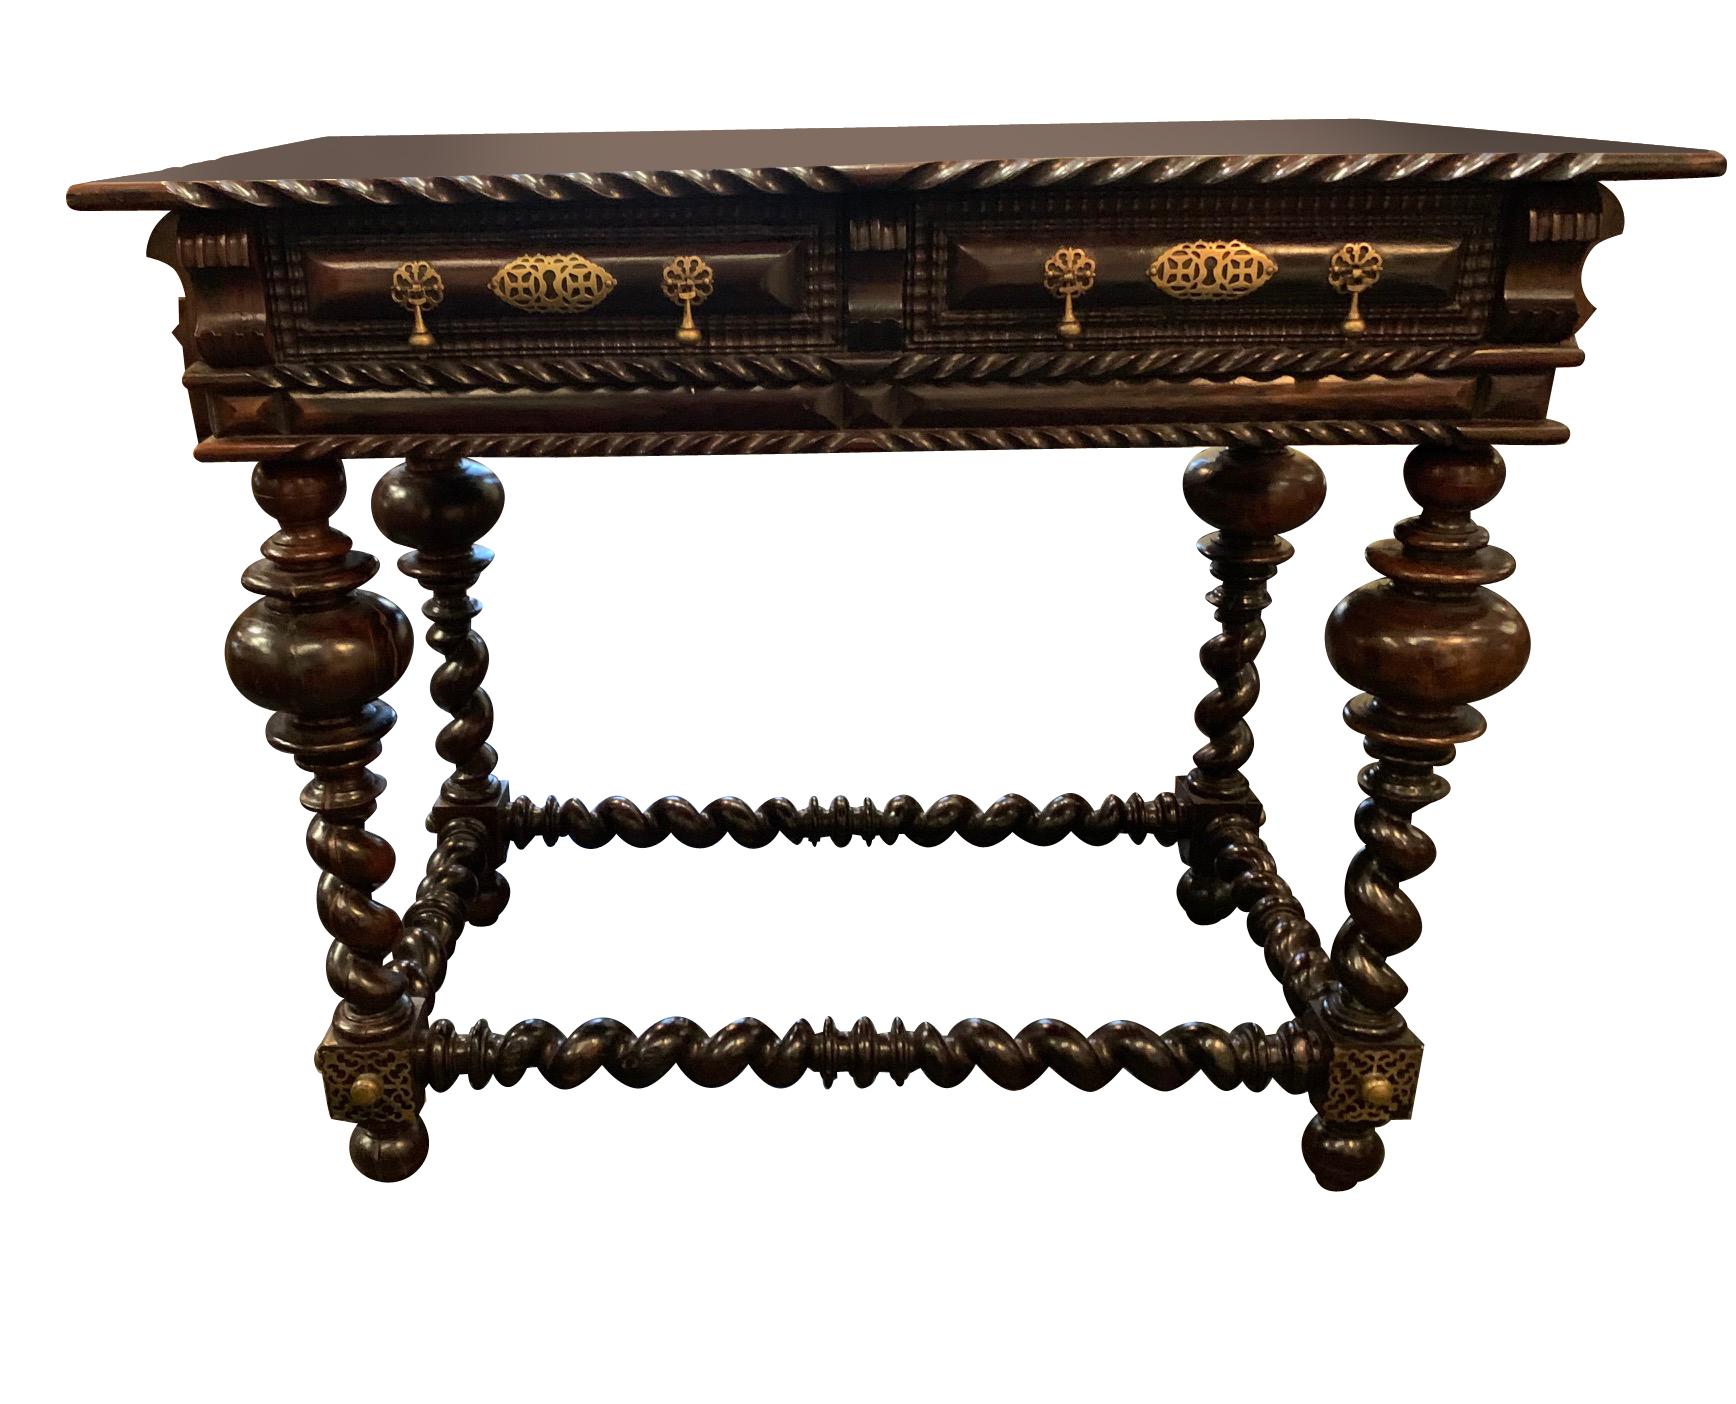 18th century Portuguese side table with two drawers.
Classic decorative trim with ornate brass details.
Barley twist legs and stretcher.
Palissandre wood.
Smaller version also available F2957.